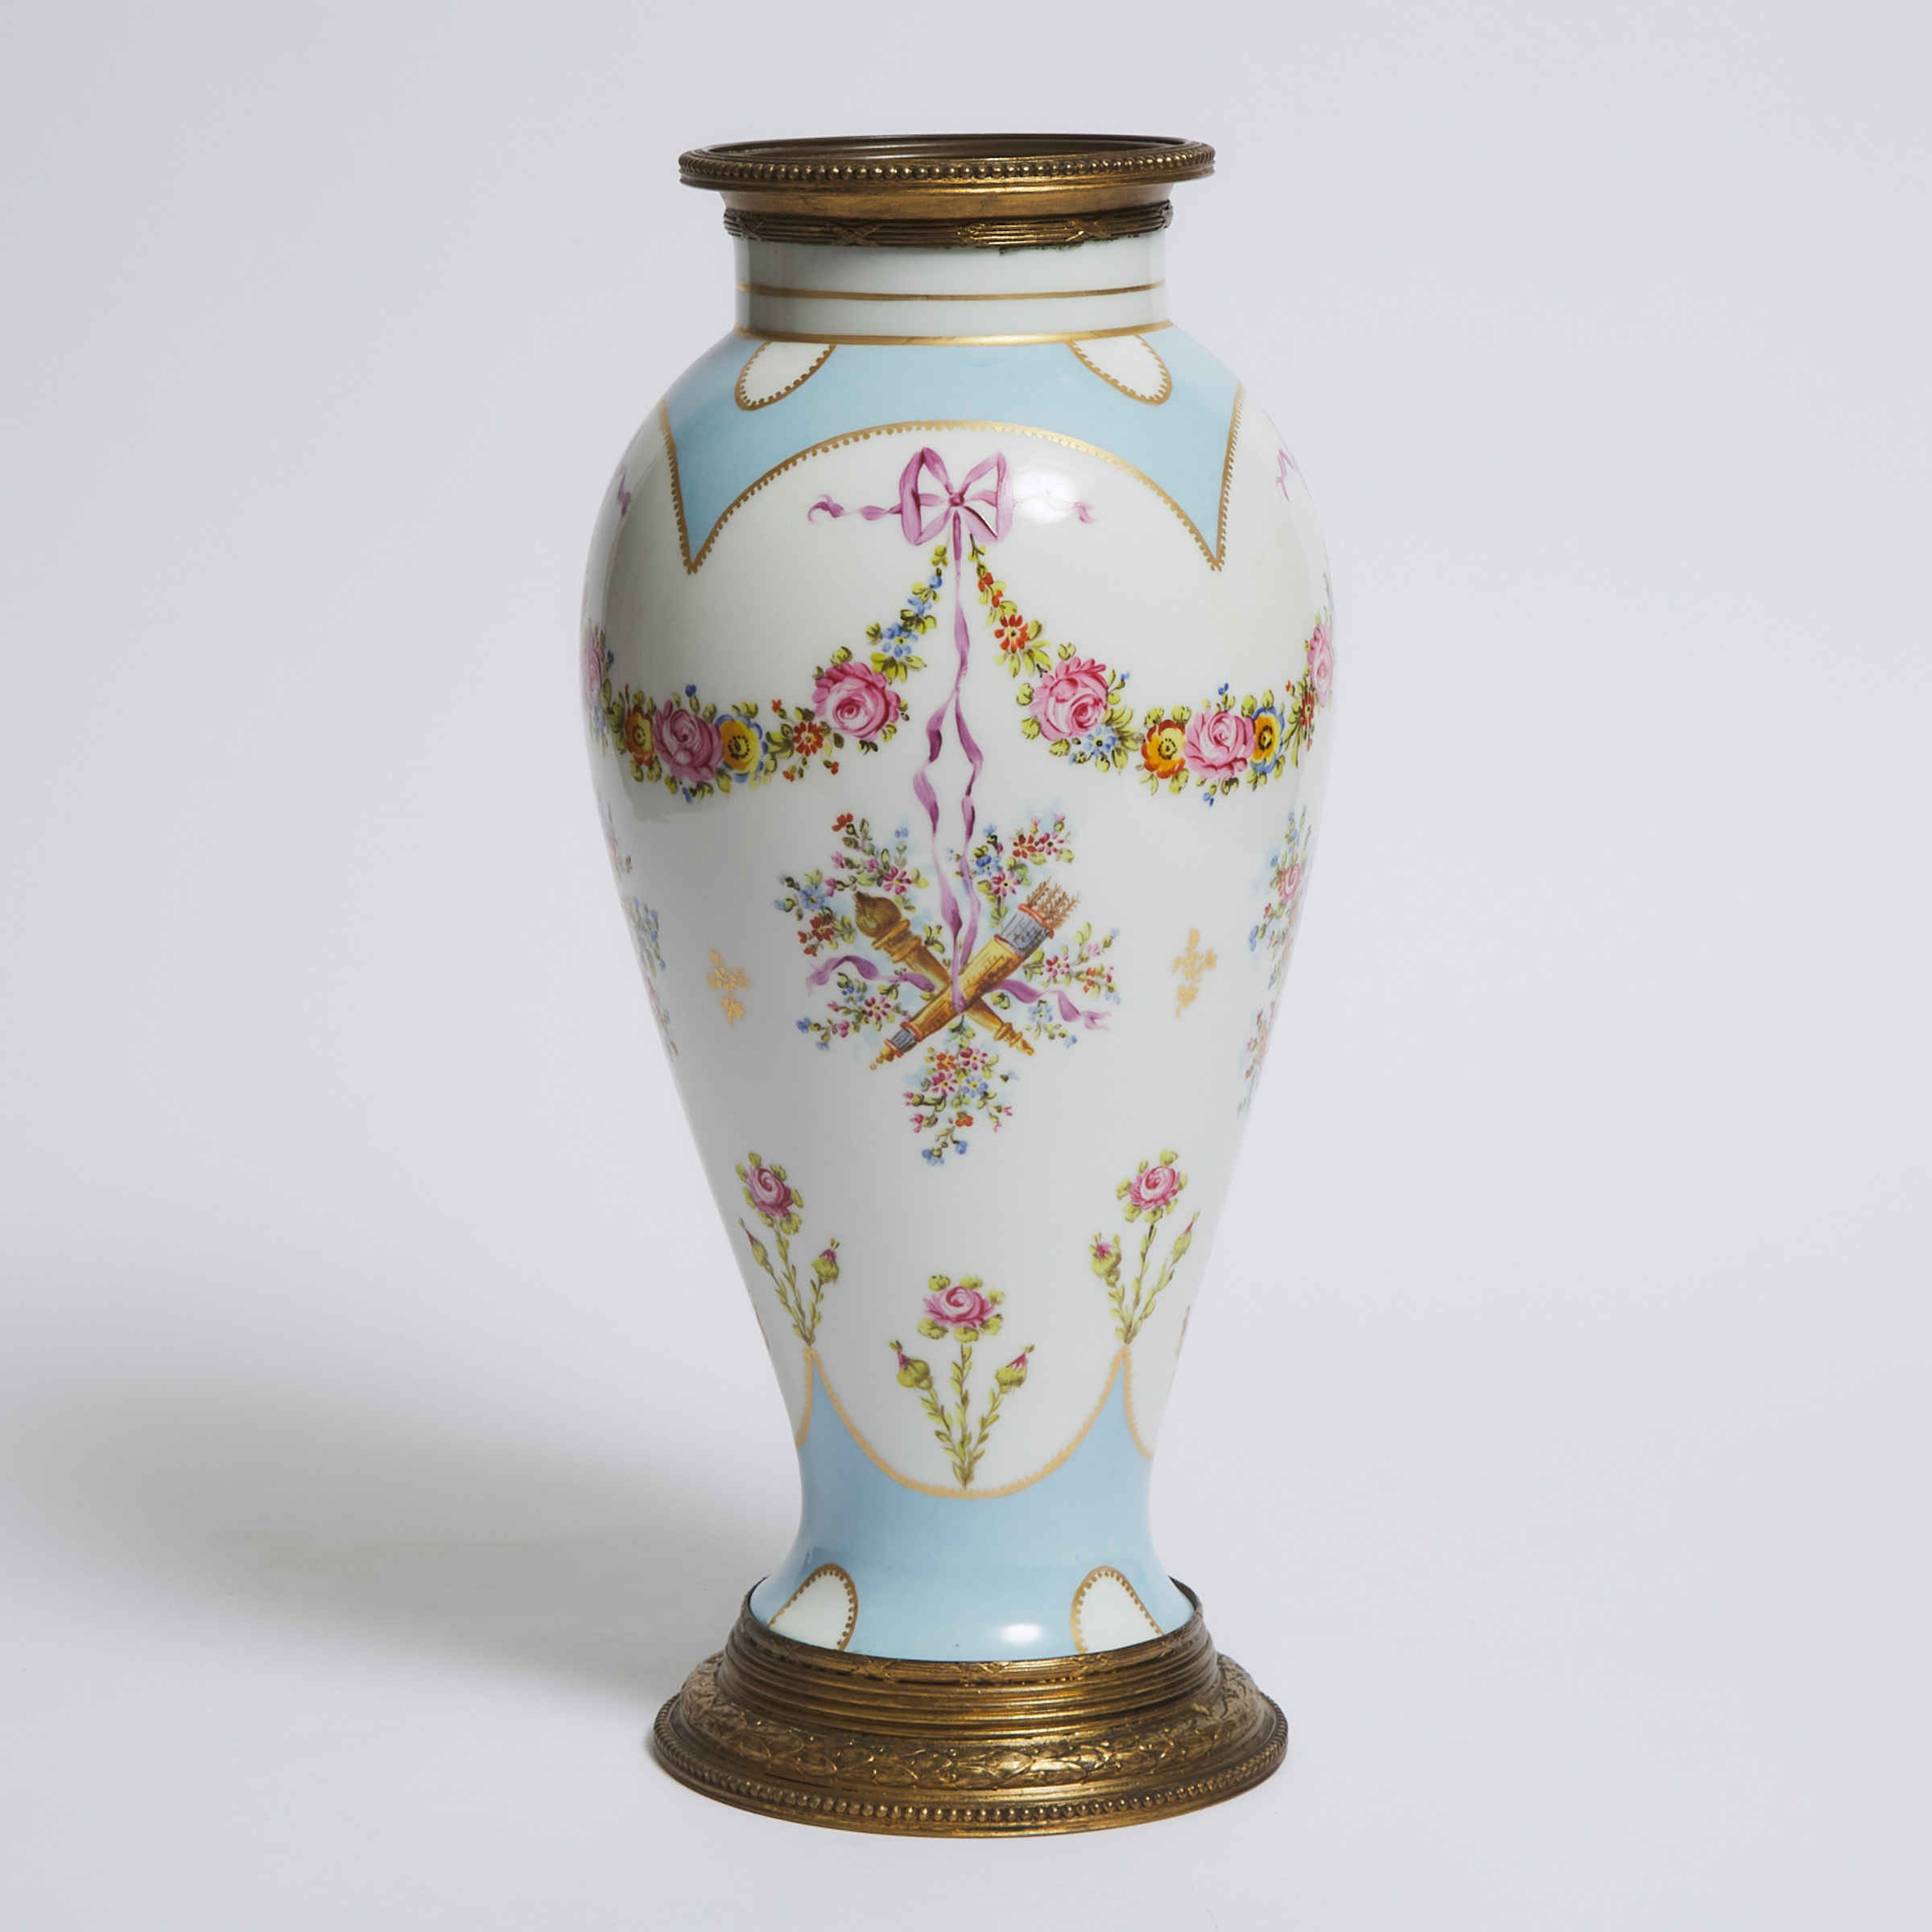 Large Gilt-Metal Mounted 'Sèvres' Vase, early 20th century